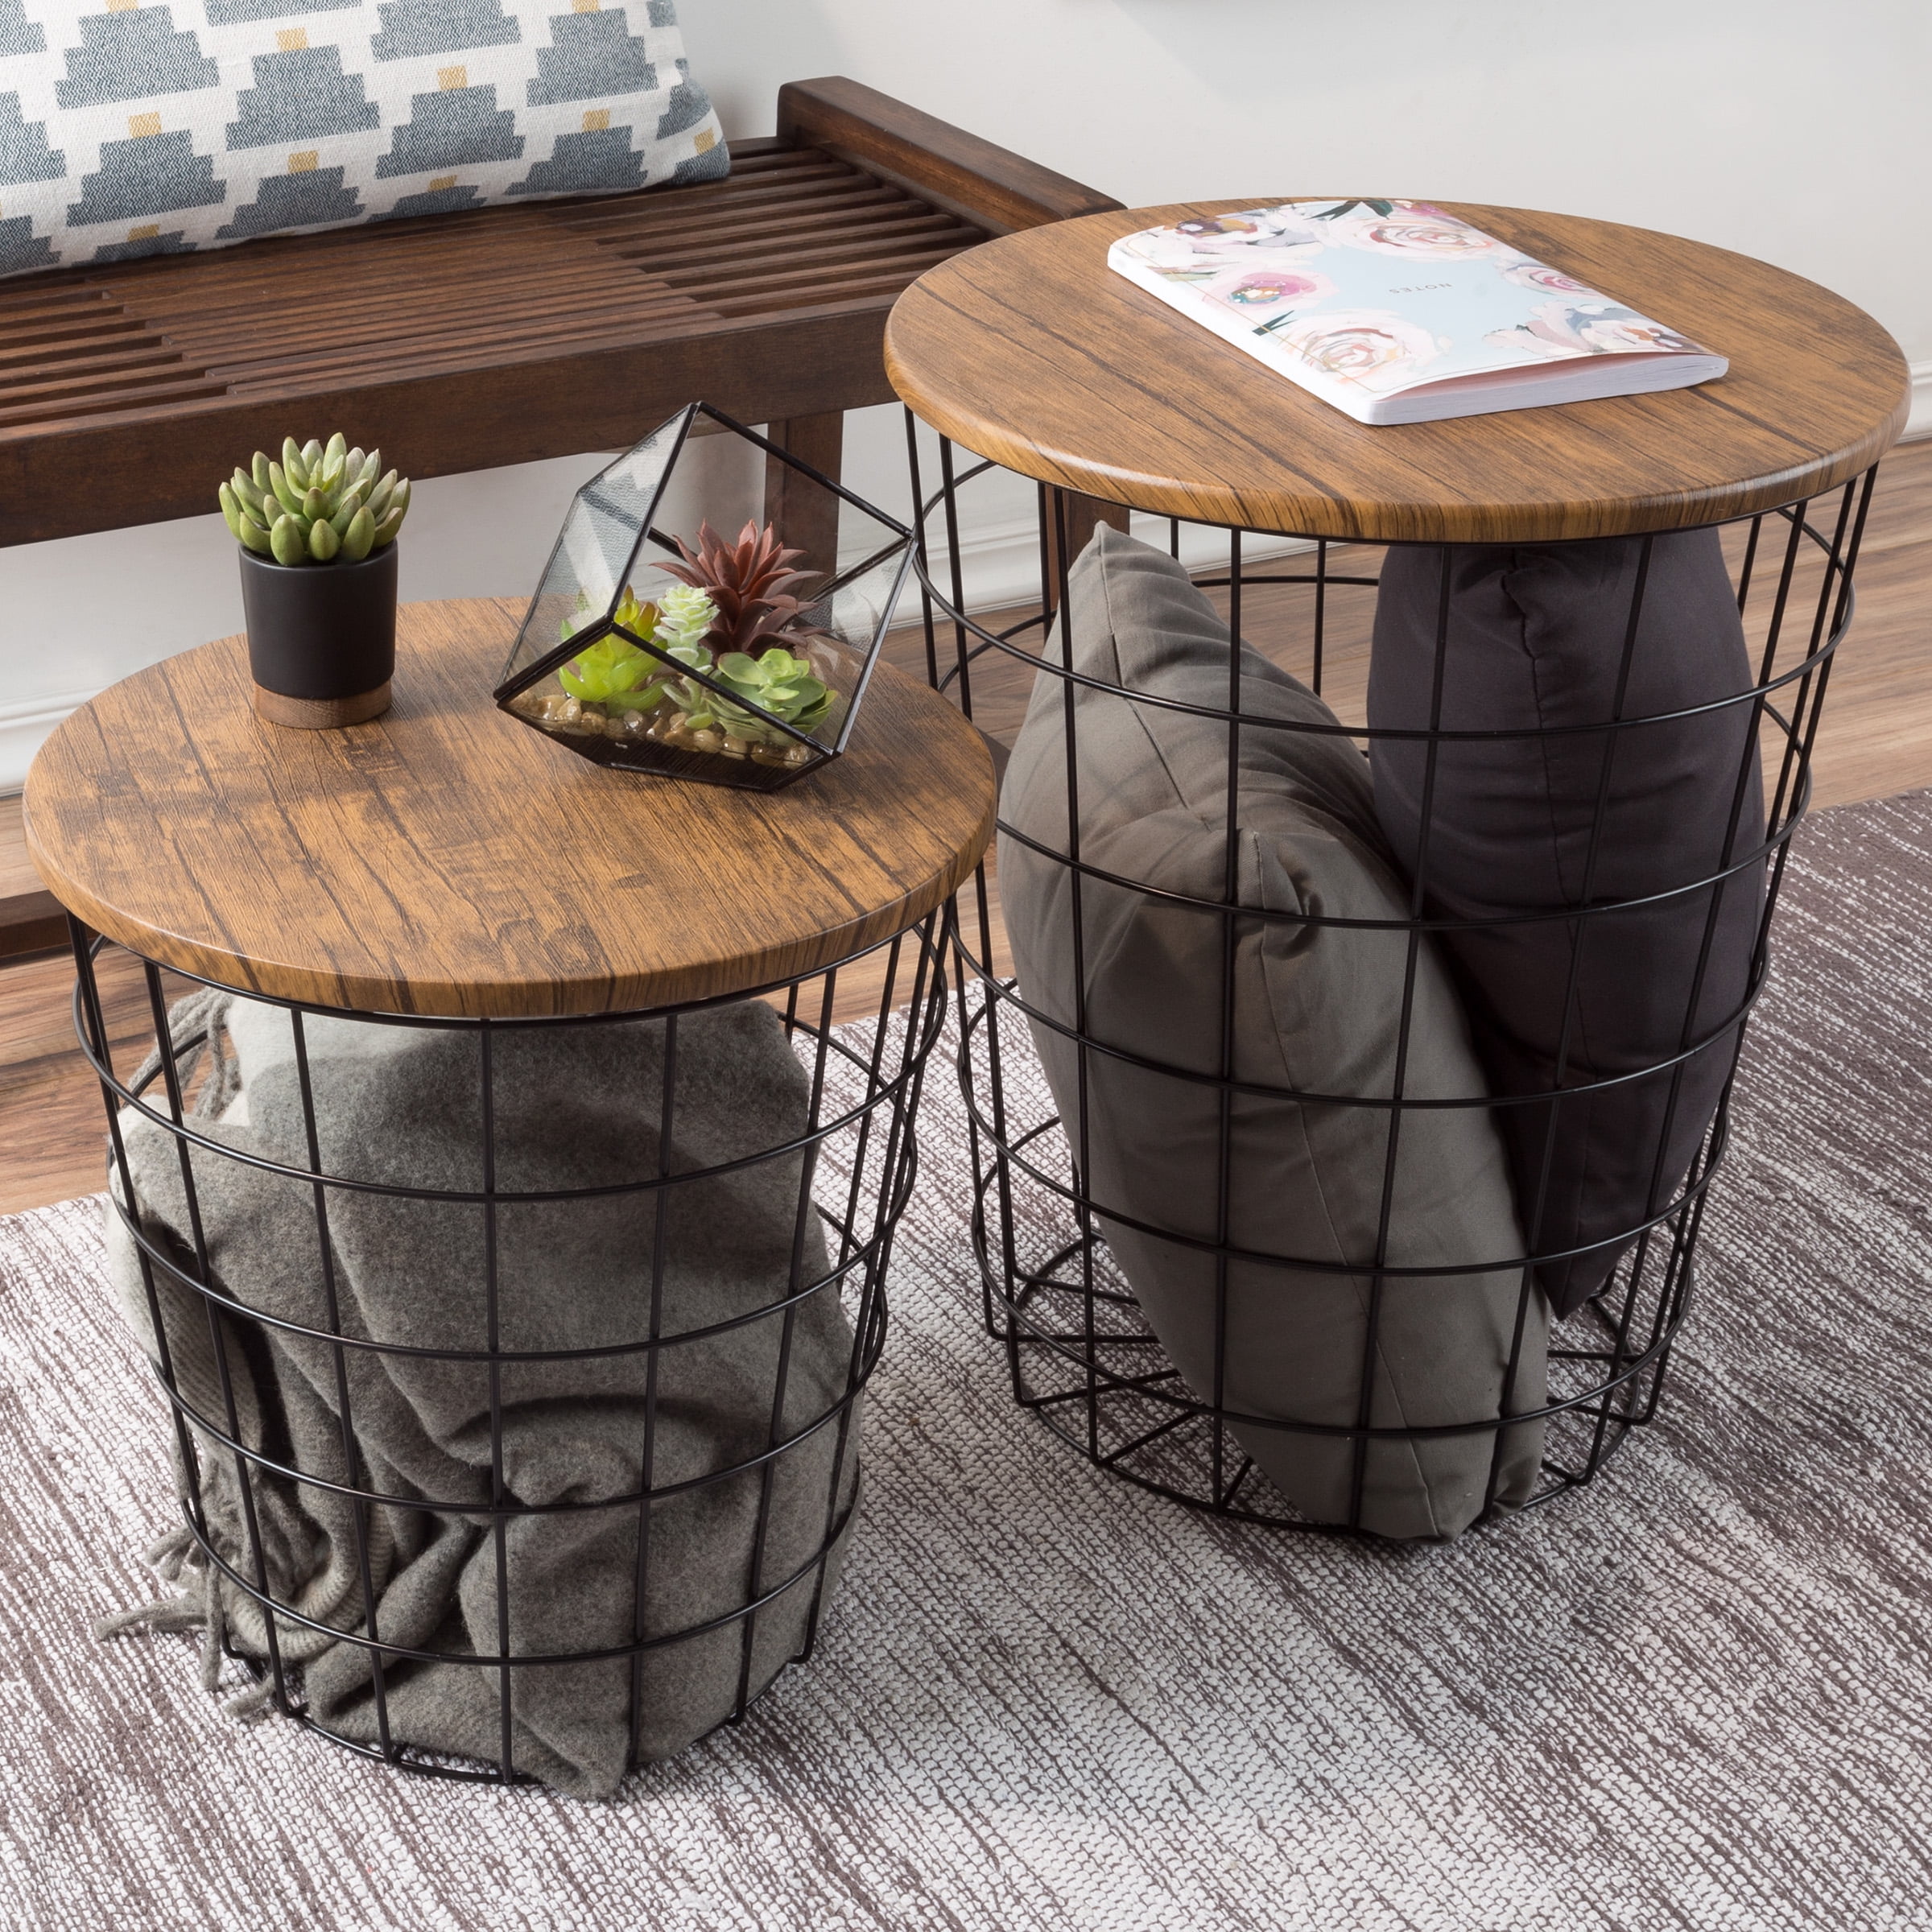 Nesting End Tables With Storage Set Of 2 Convertible Round Metal Basket Veneer Wood Top Accent Side Tables For Home And Office By Lavish Home Chestnut Walmart Com Walmart Com